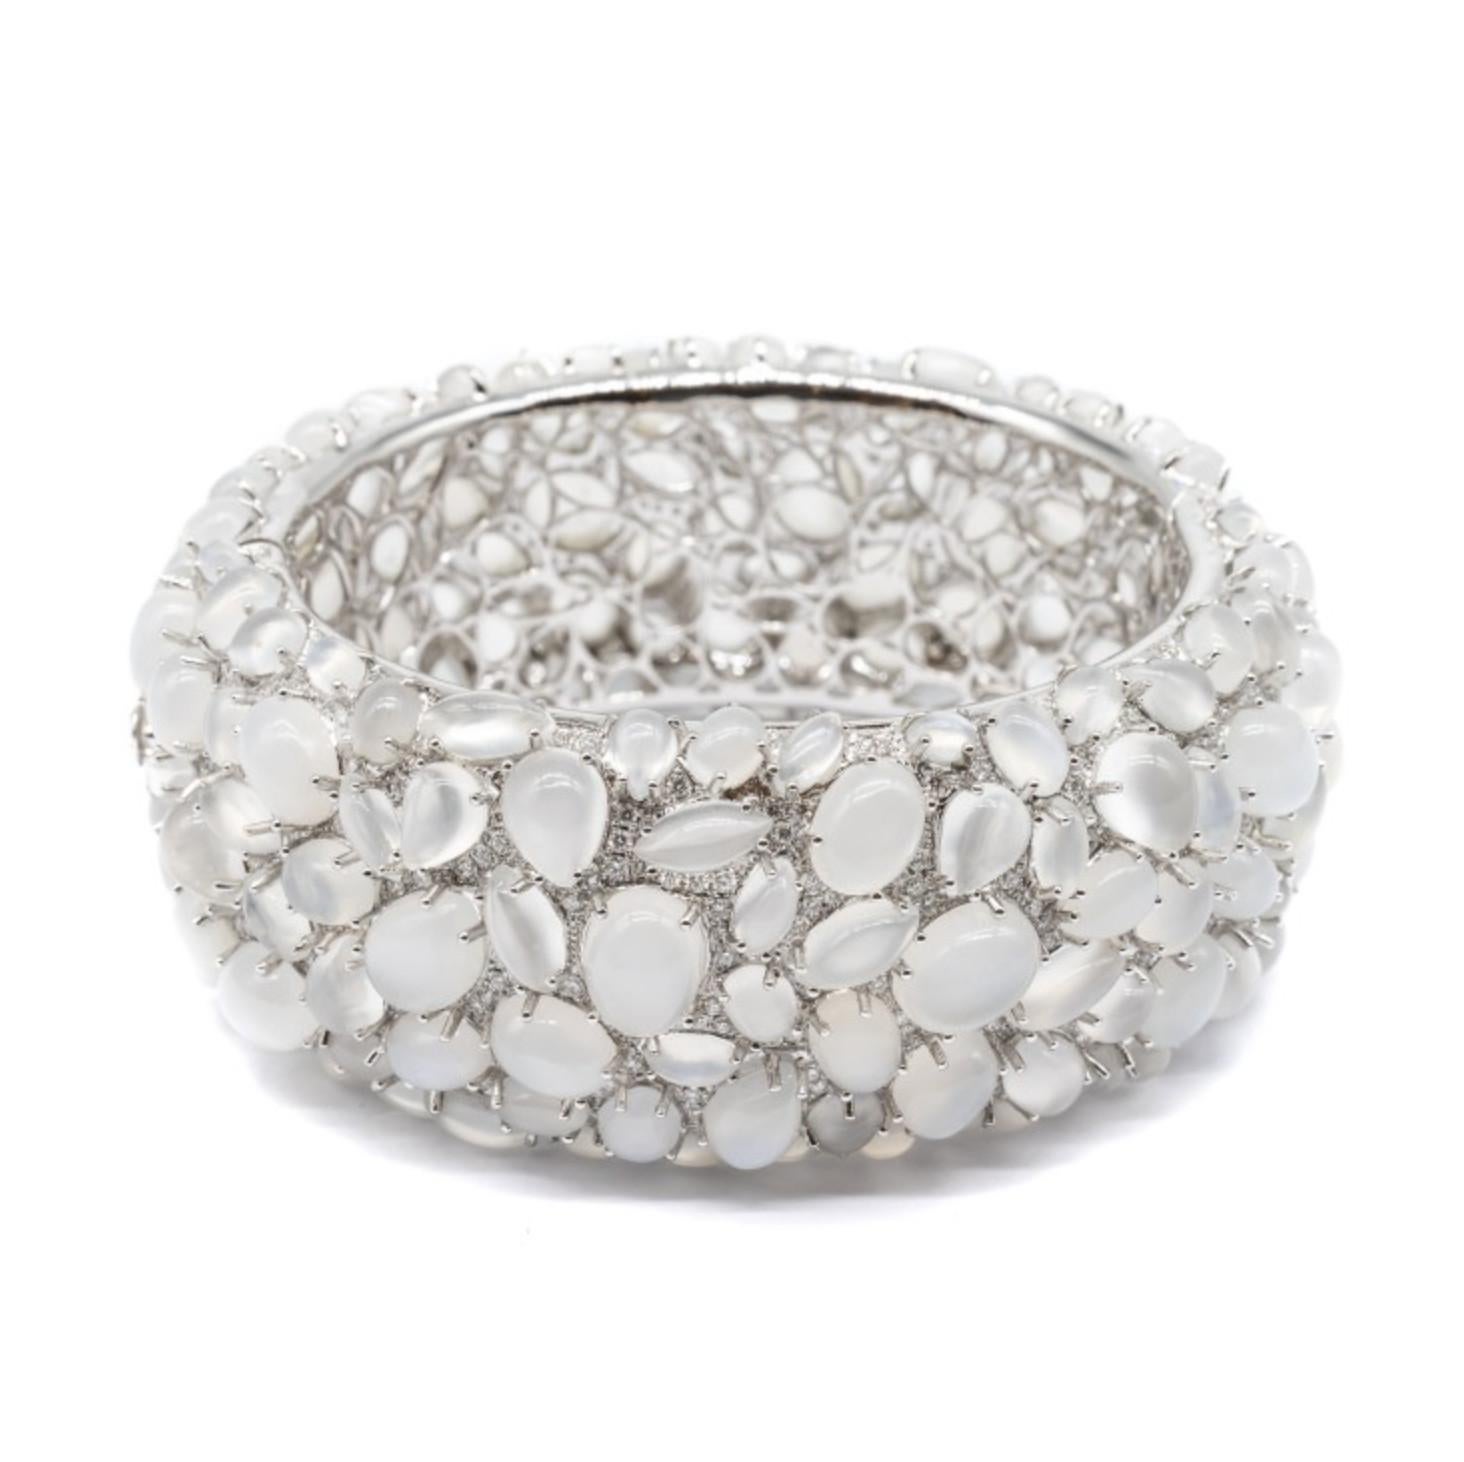 A moonstone and diamond bangle bracelet, set with one hundred and ninety cabochon-cut moonstones weighing an estimated total of 138.45ct, and five hundred and seventy-four pavé set round brilliant-cut diamonds weighing an estimated total of 4.84ct,